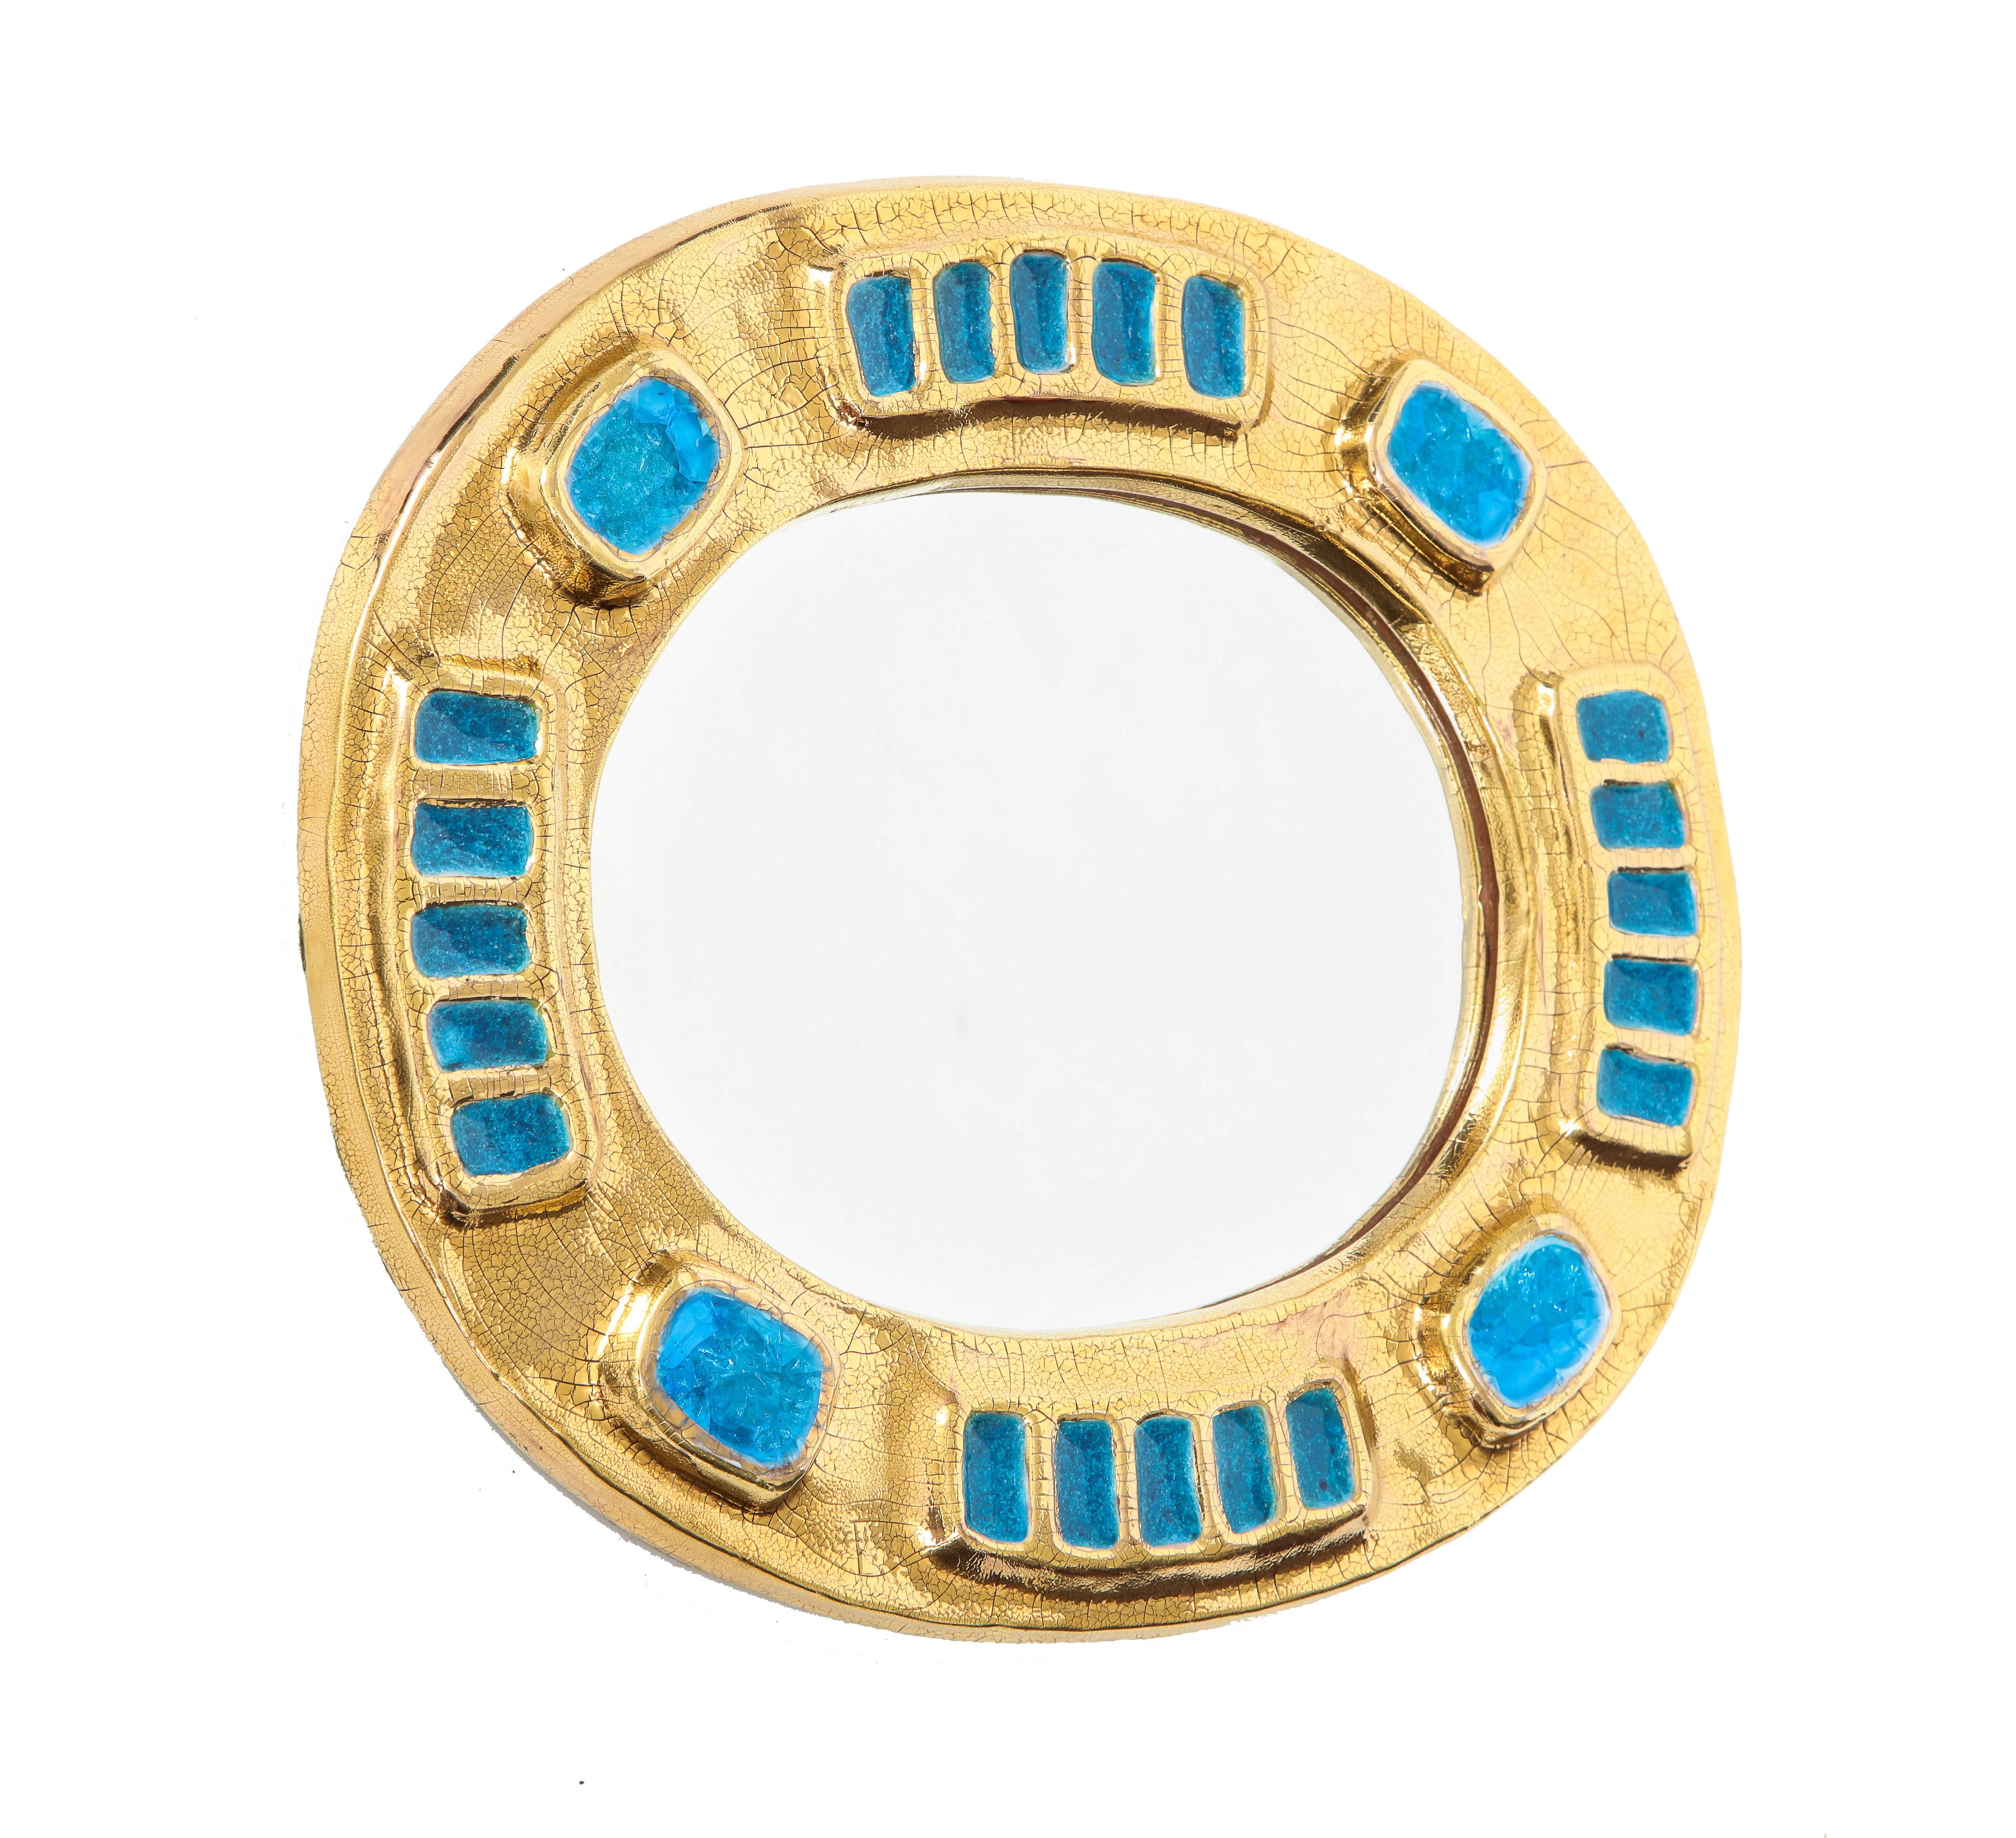 Francois Lembo ceramic mirror gold blue fused glass France 1970s. Gold crackle glazed mirror with blue fused decorations. Can be displayed vertically or horizontally.